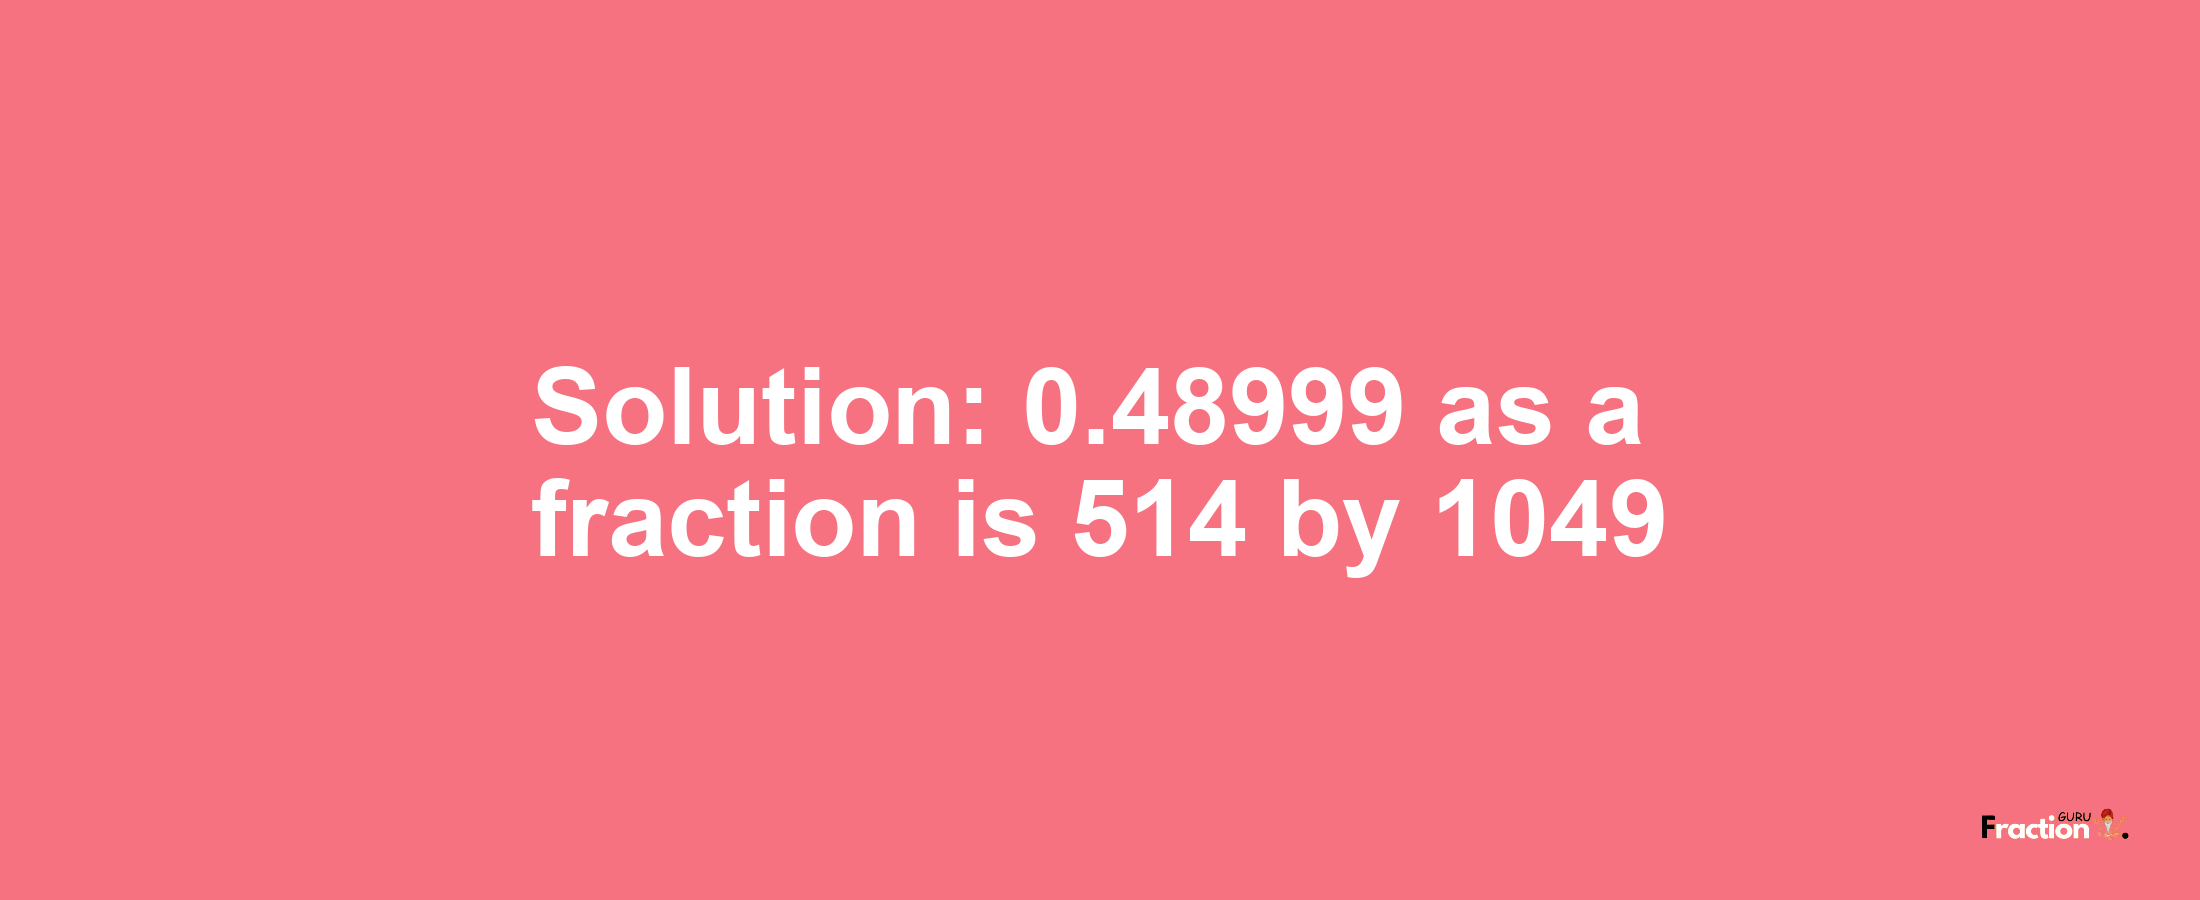 Solution:0.48999 as a fraction is 514/1049